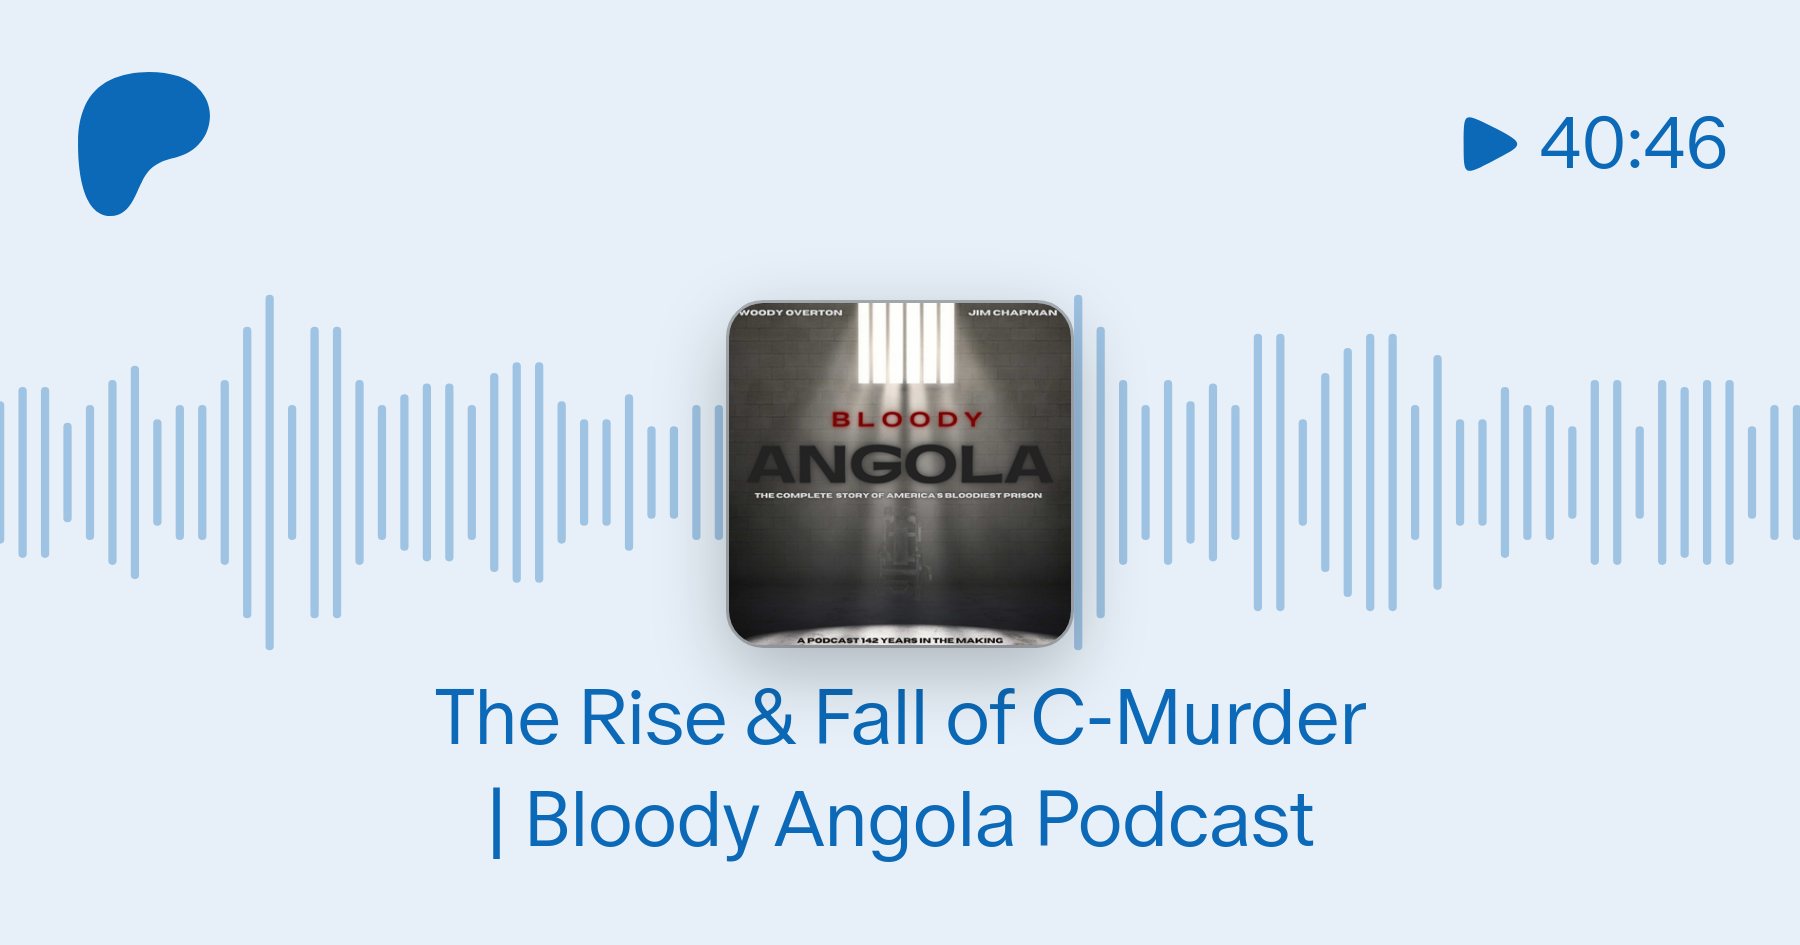 Bloody Angola Podcast by Woody Overton & Jim Chapman